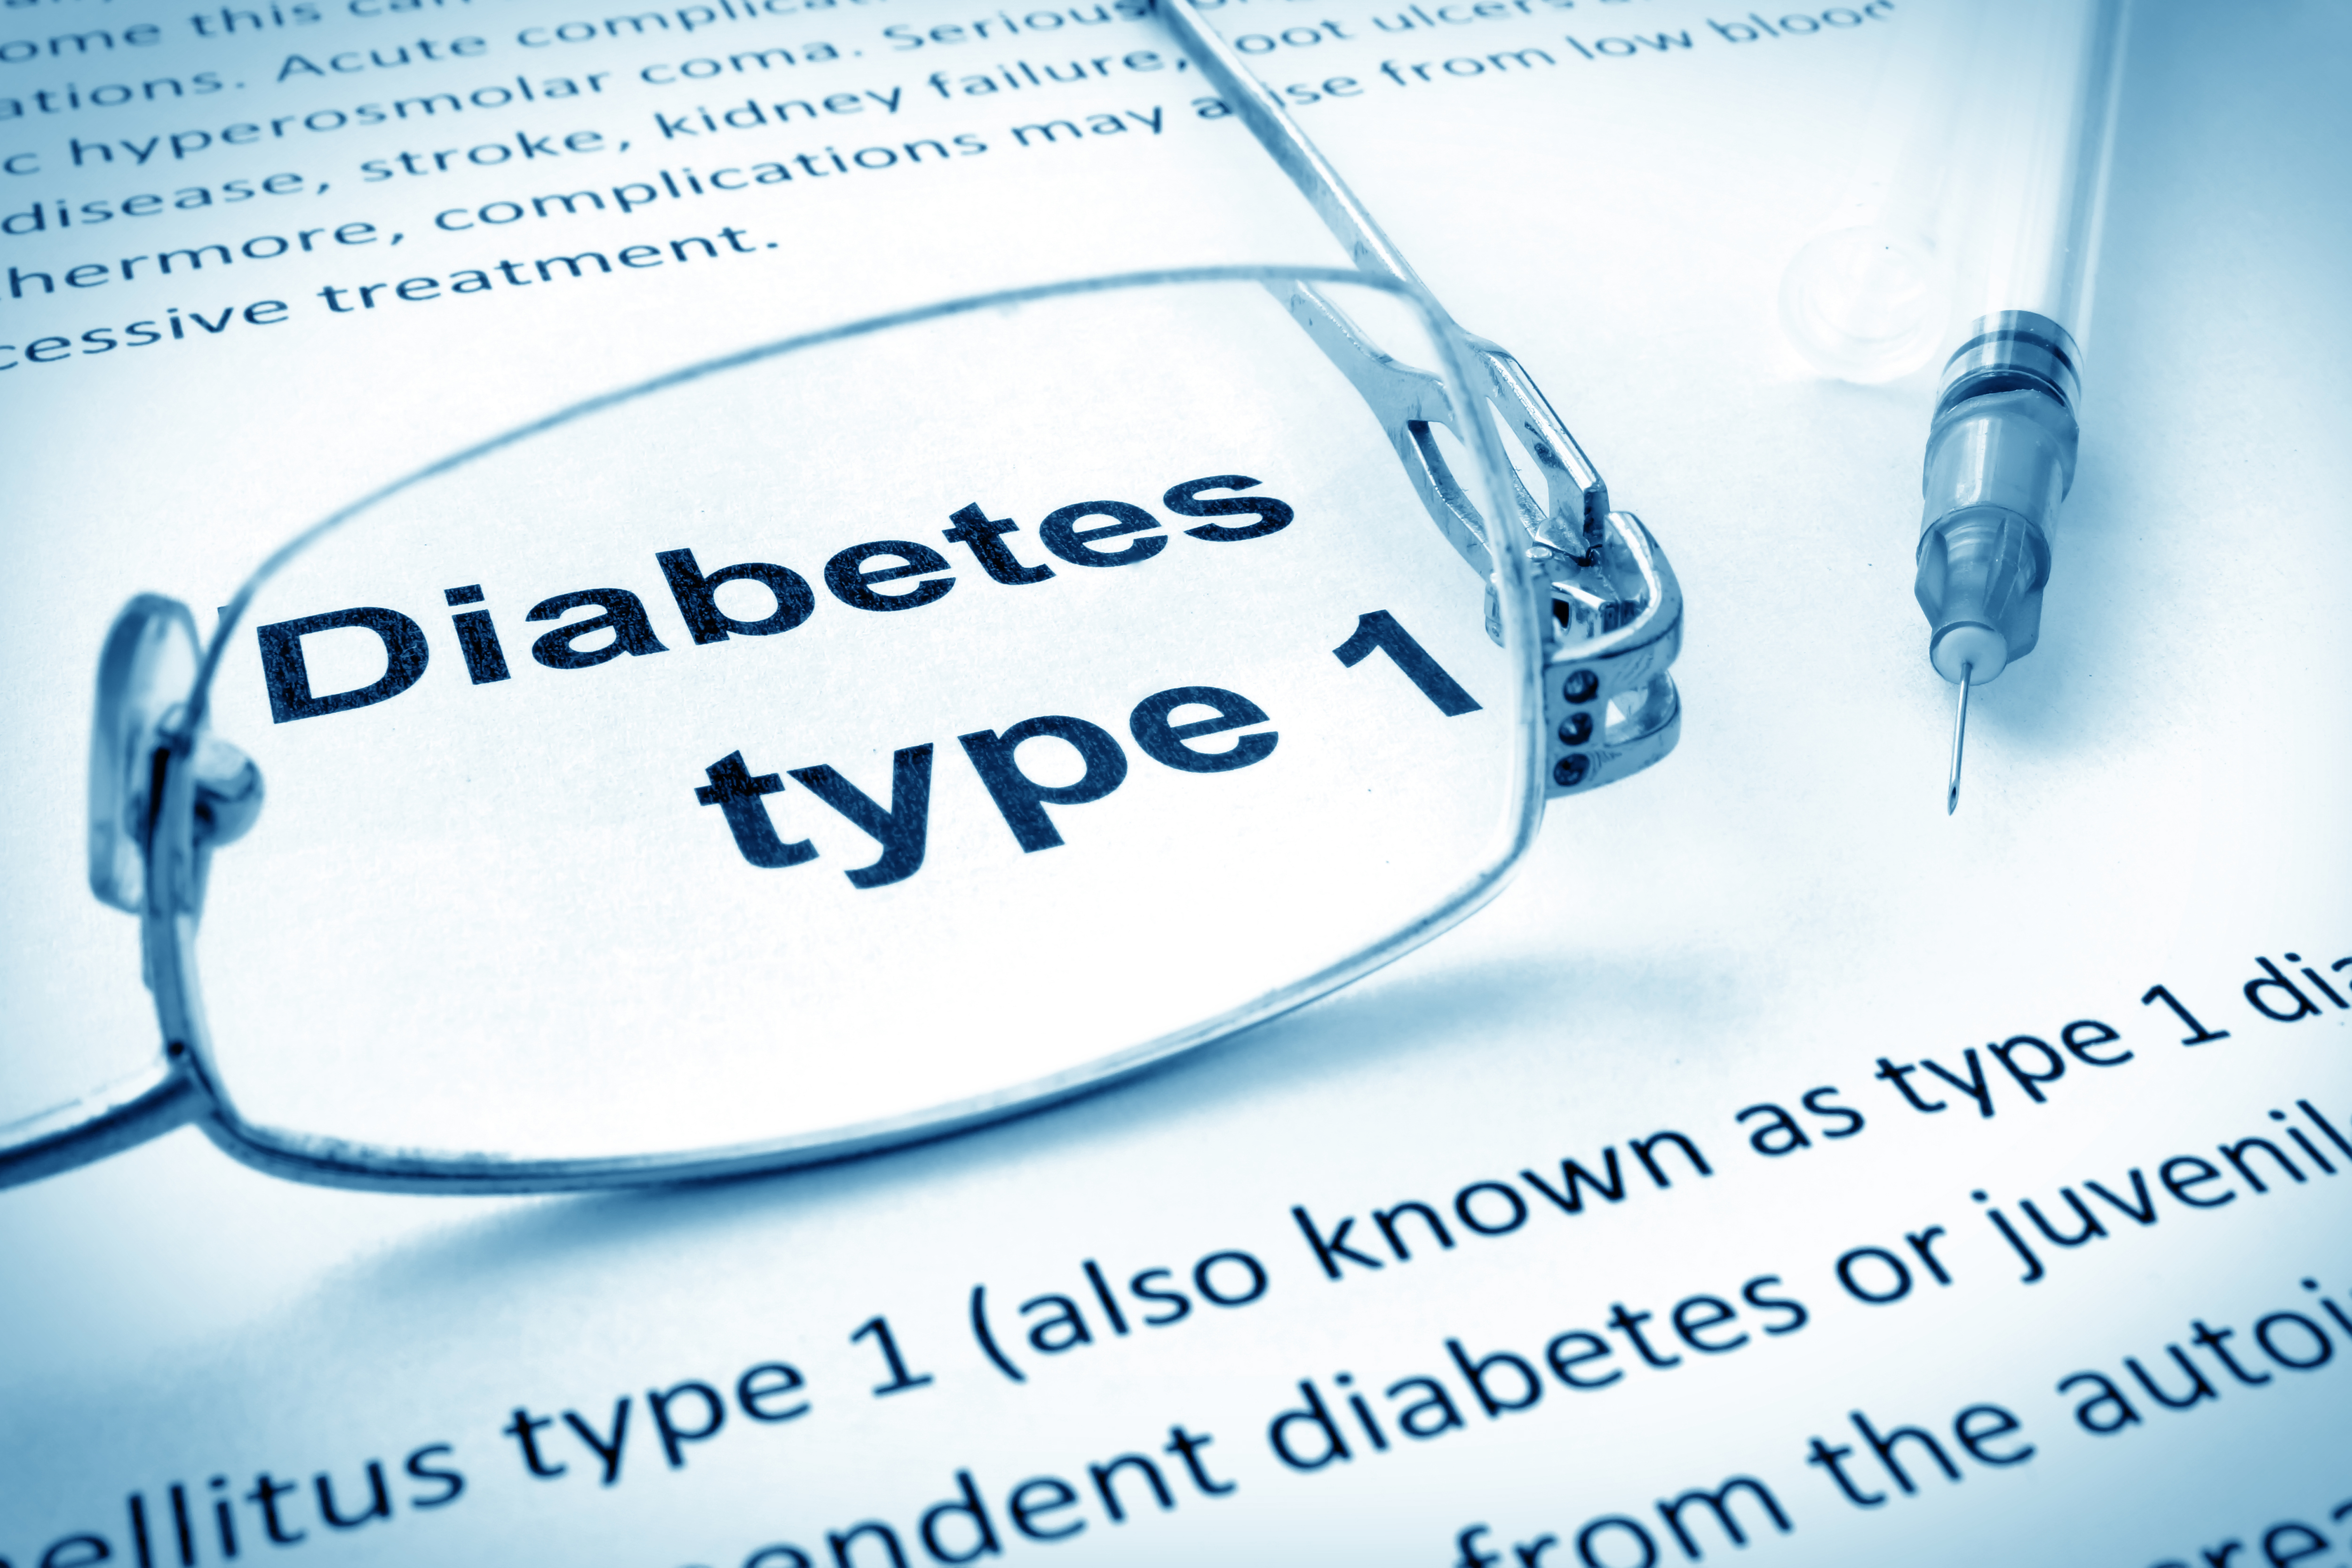 Image for What is Type 1 Diabetes?